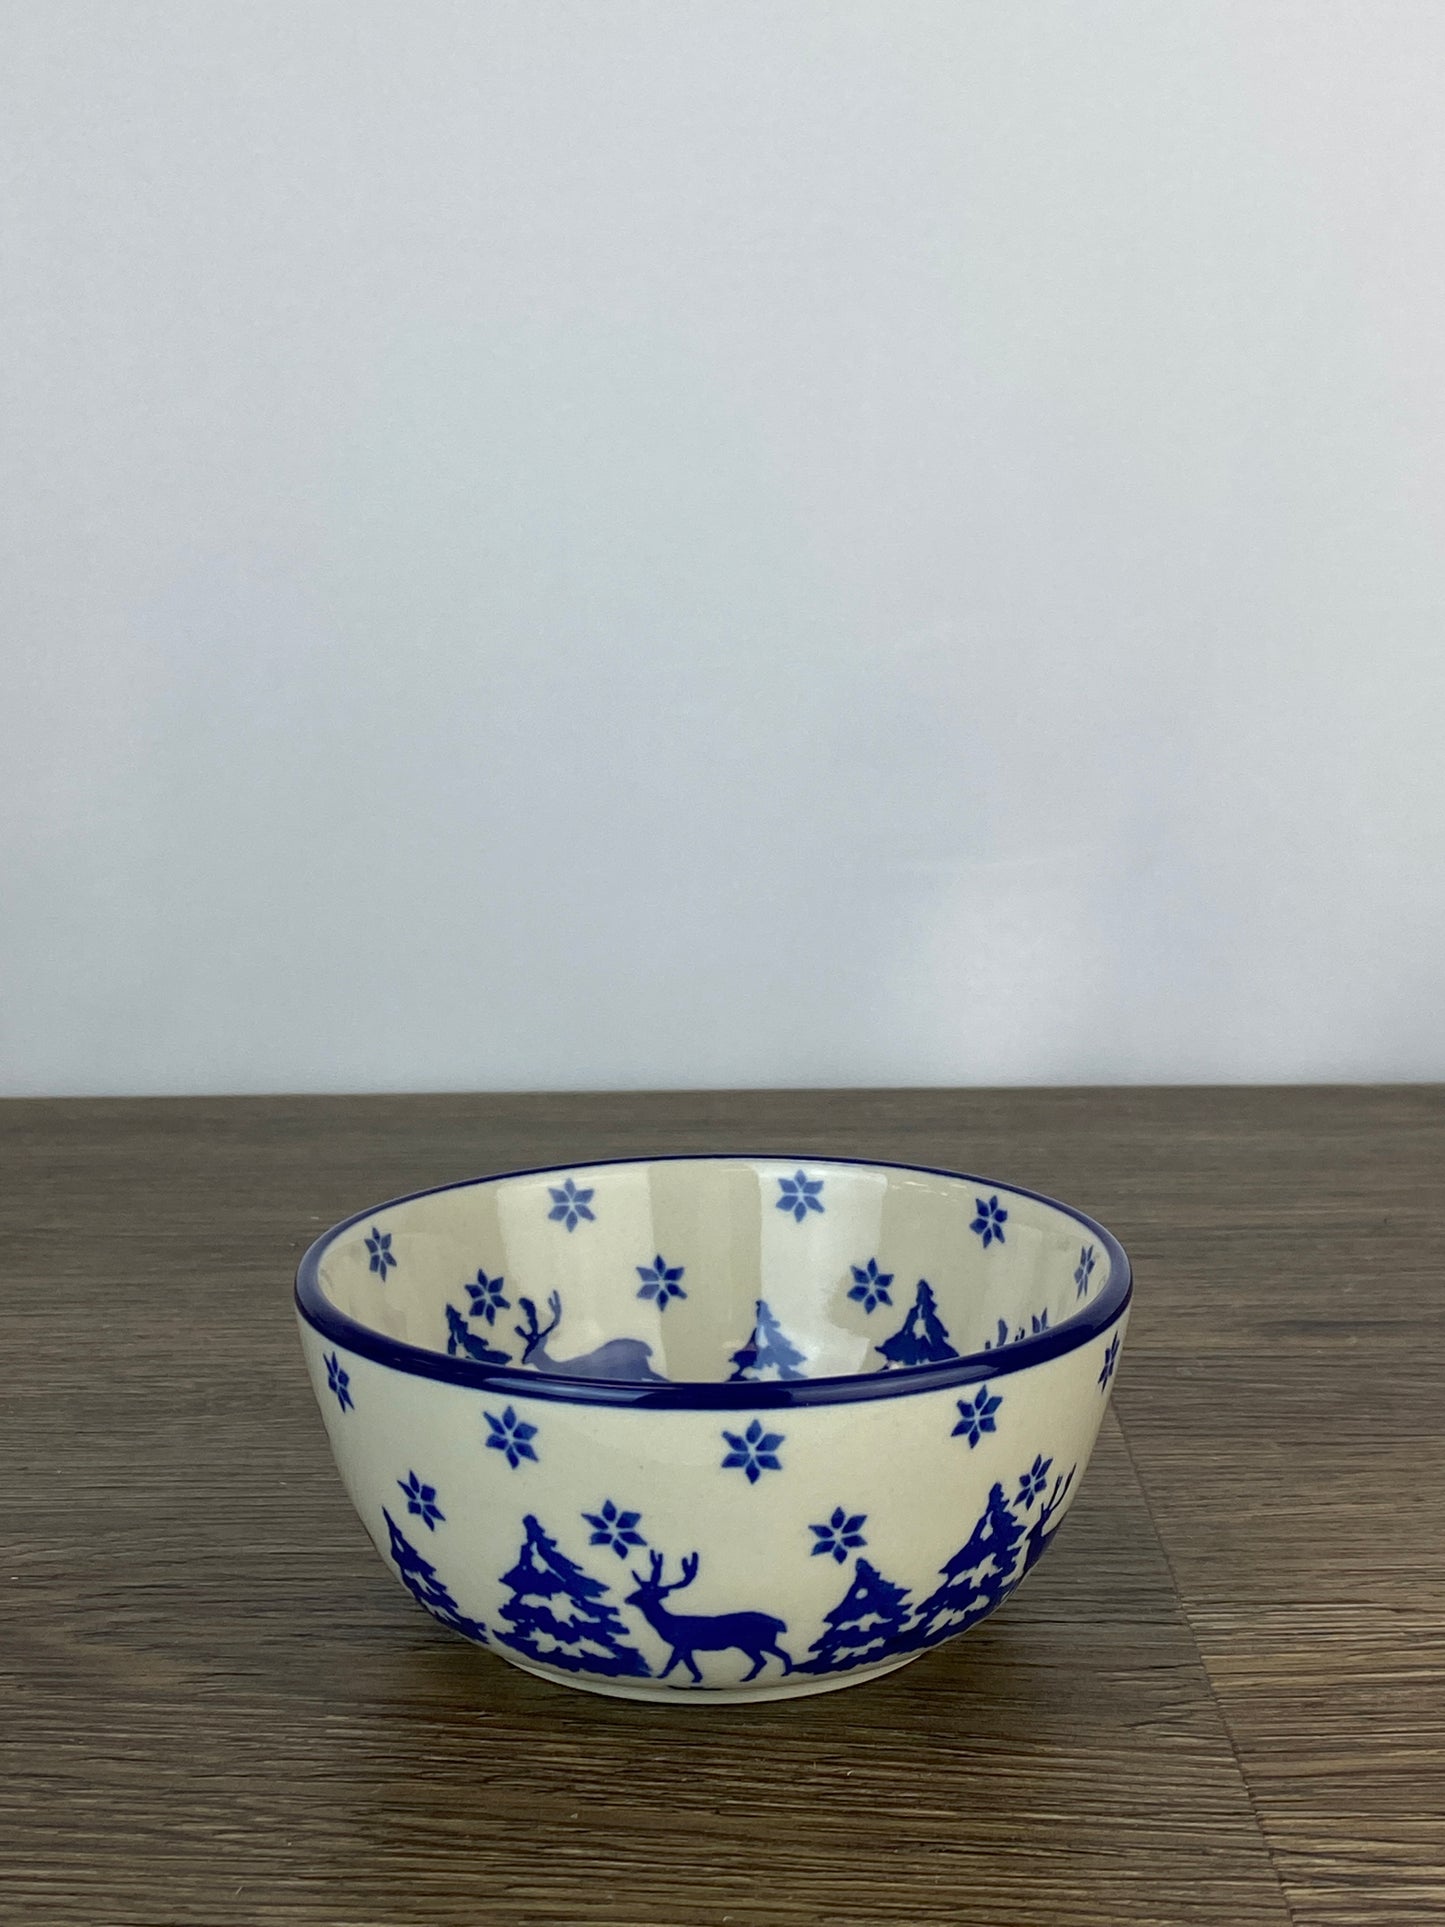 Small Cereal / Dessert Bowl - Shape 17 - Pattern 1931